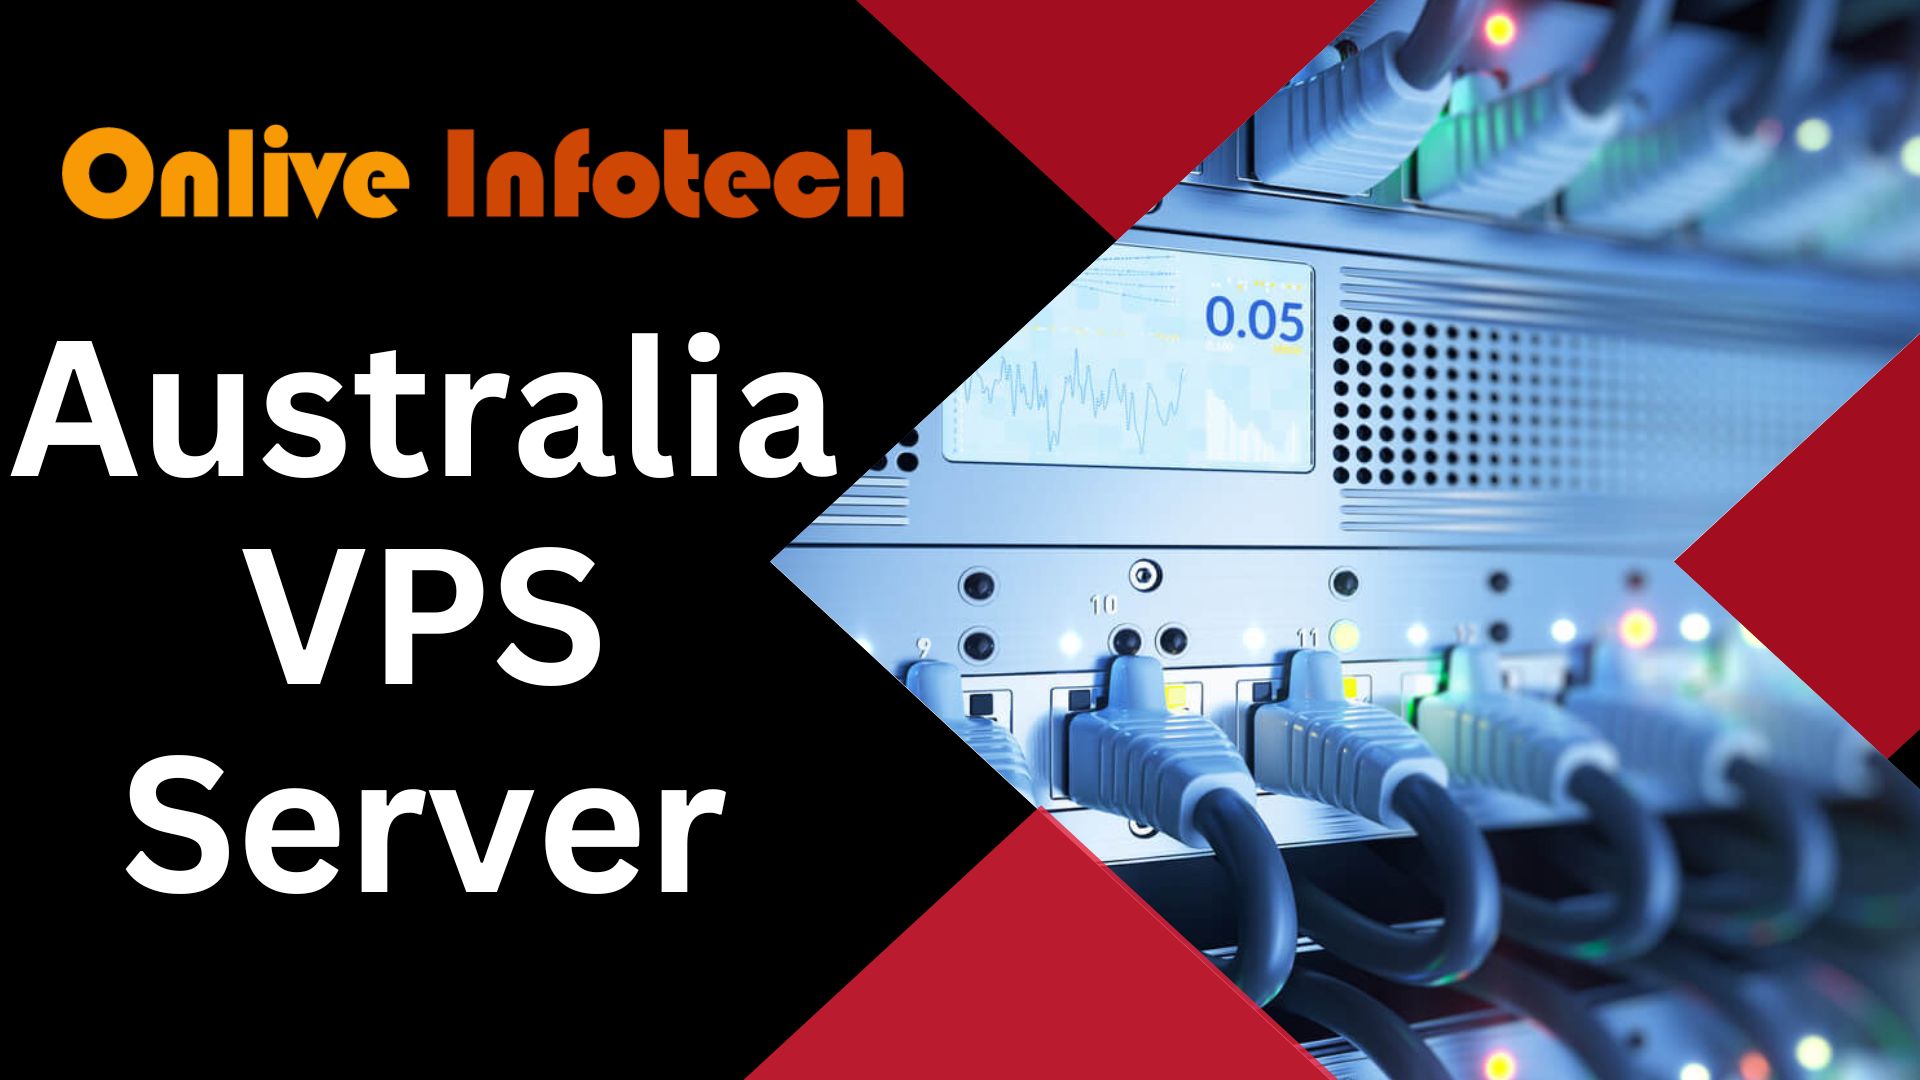 Boost Your Business with Australia VPS Server Hosting via Onliveinfotech